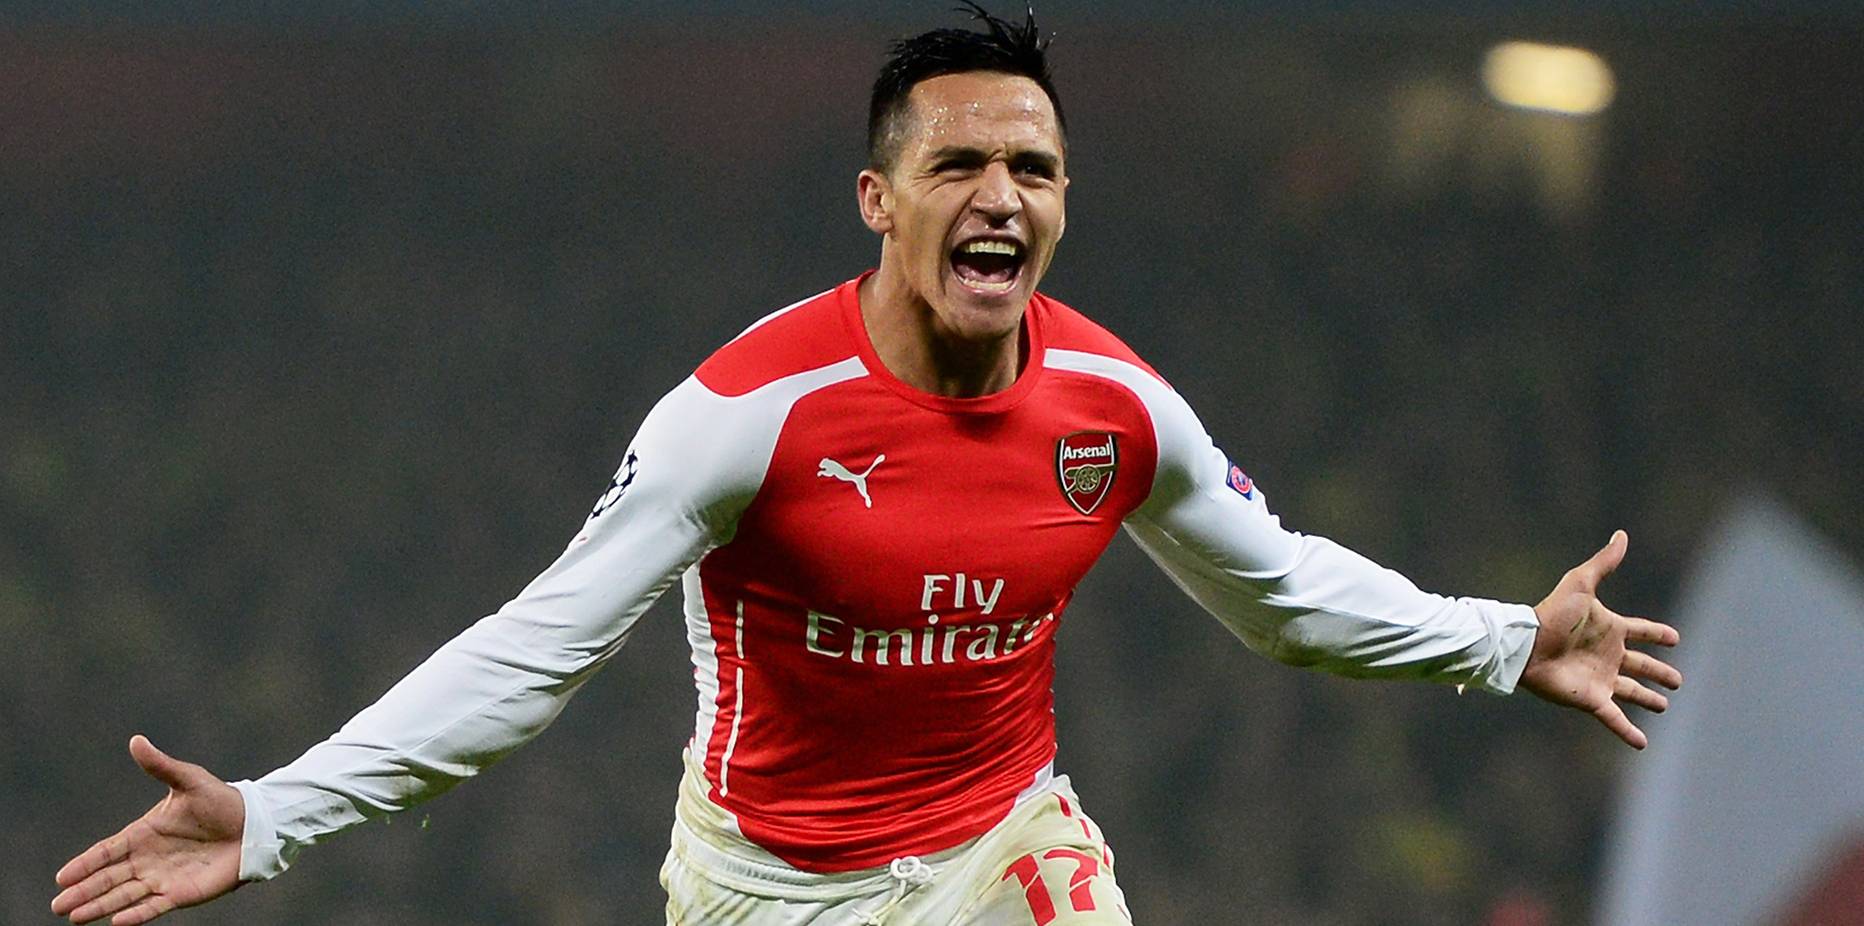 Alexis Sánchez, celebrating a goal with the Arsenal